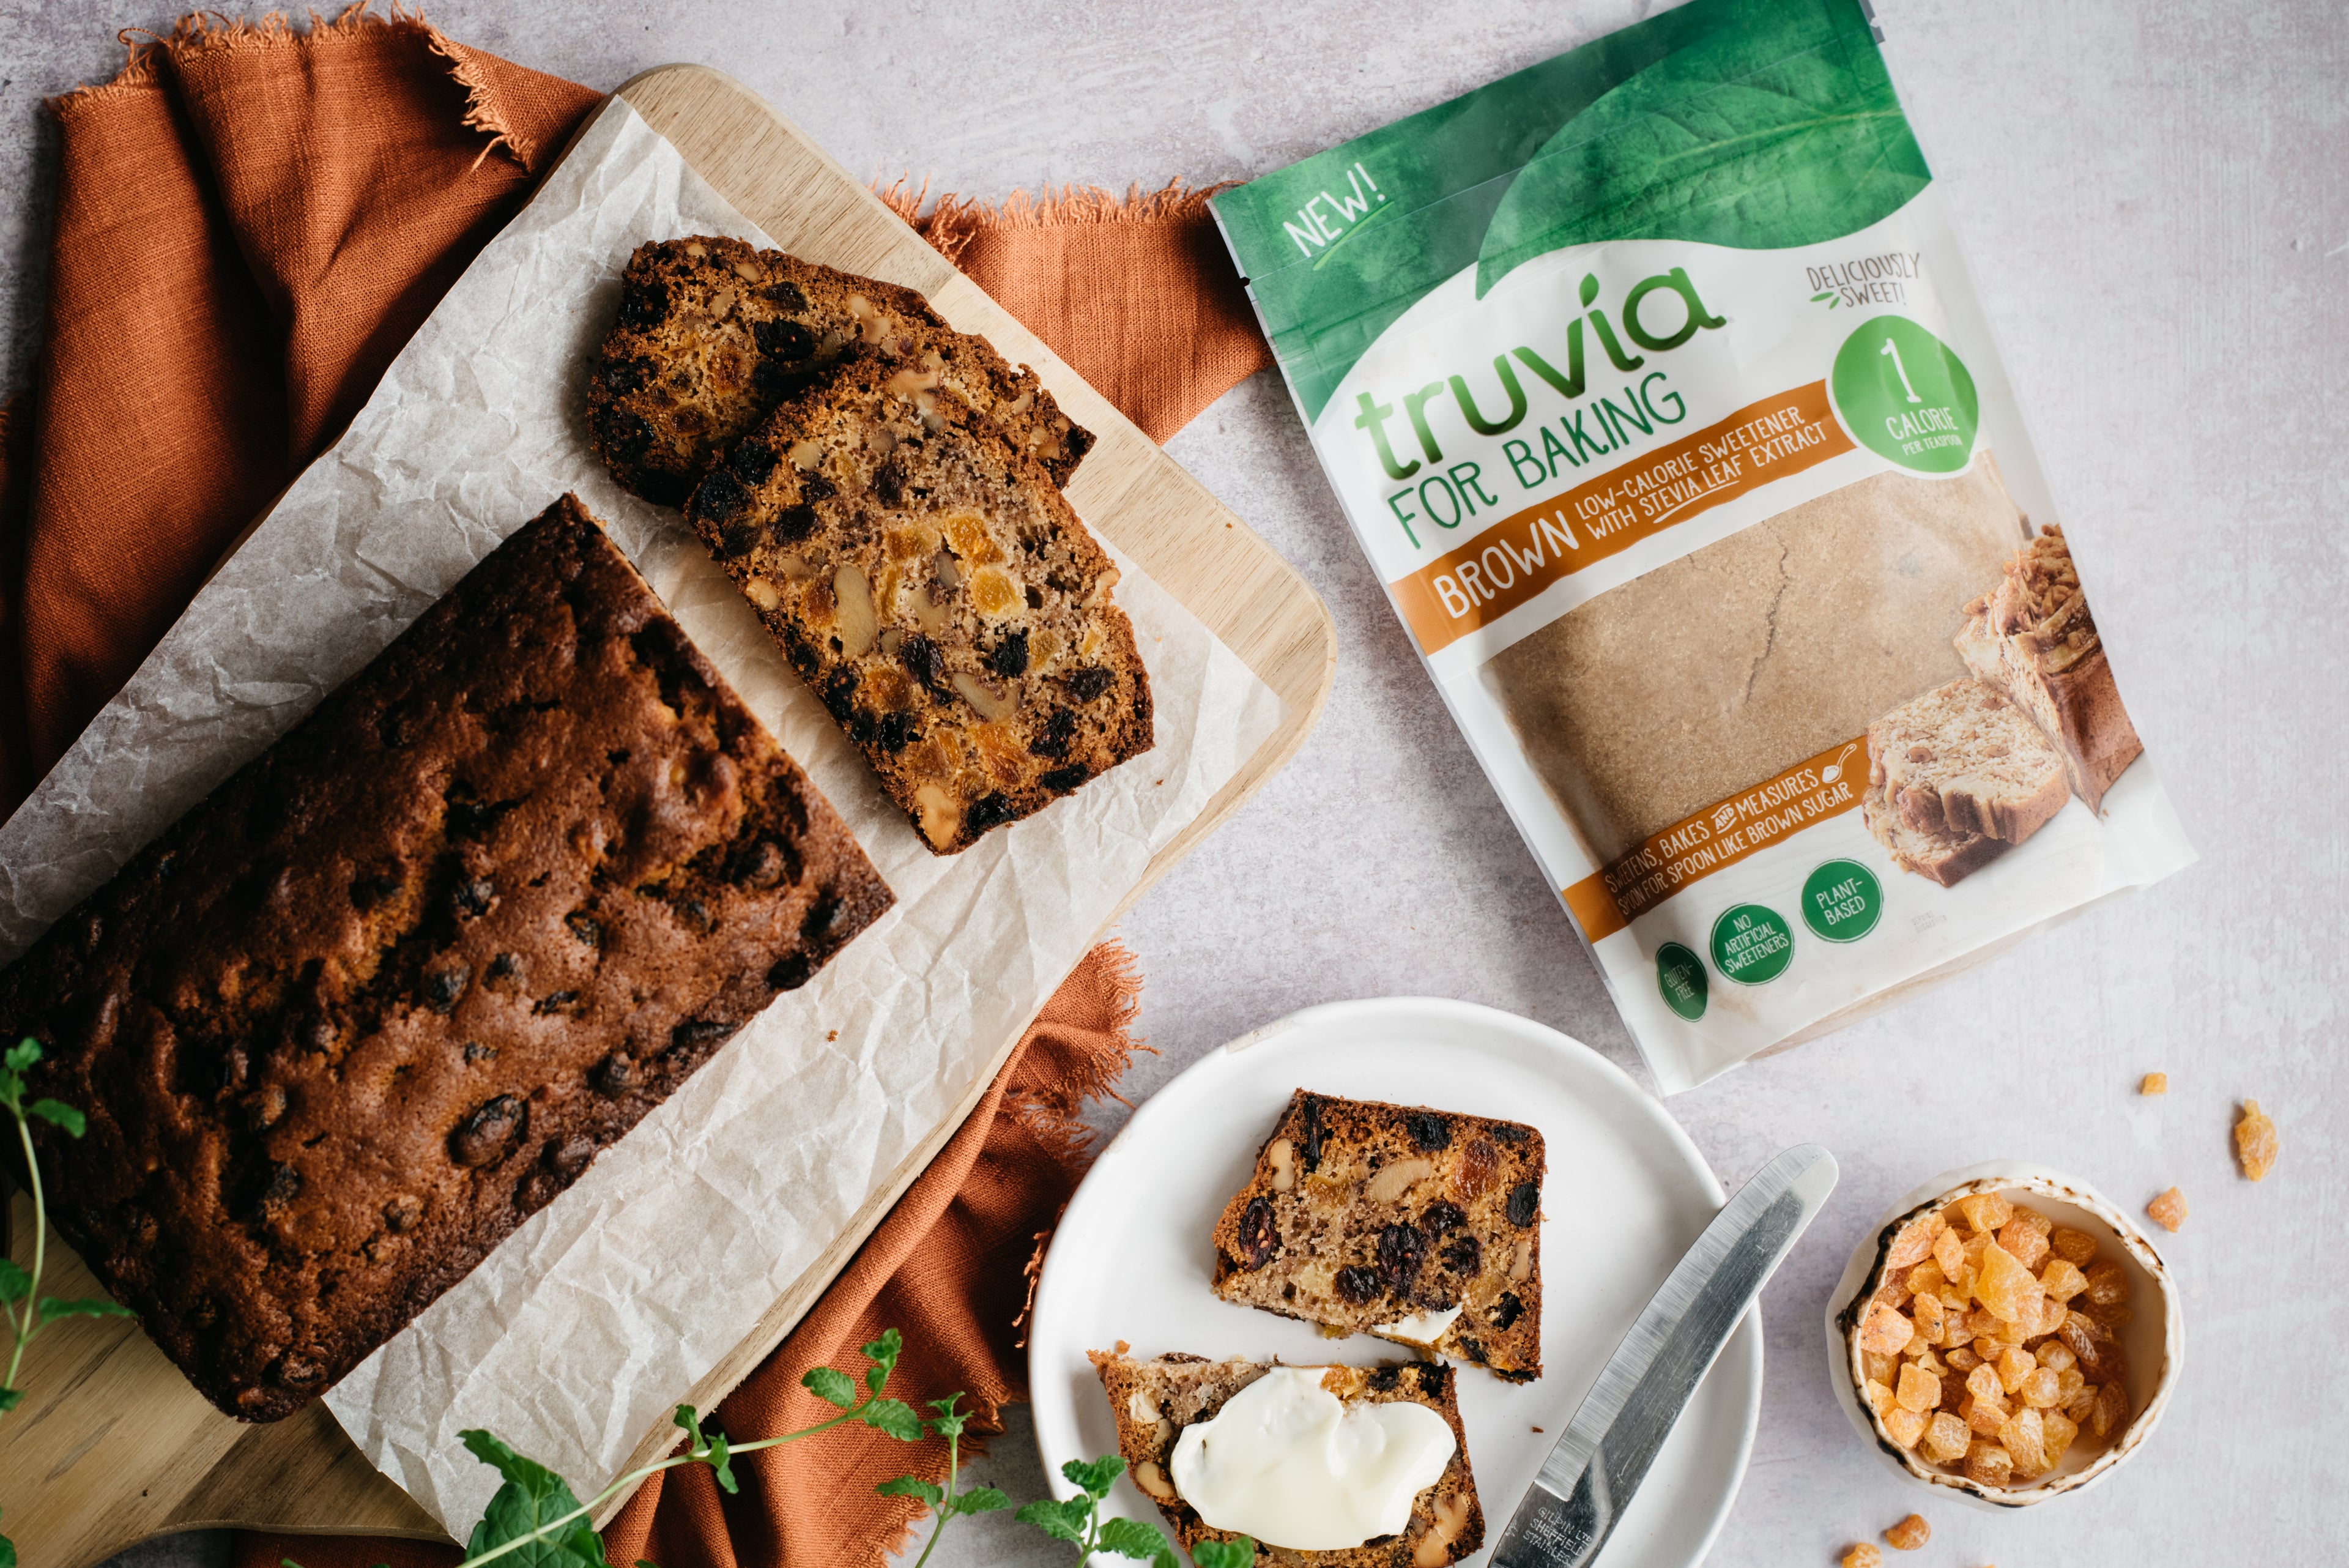 Light fruit cake next to a packet of truvia for baking brown